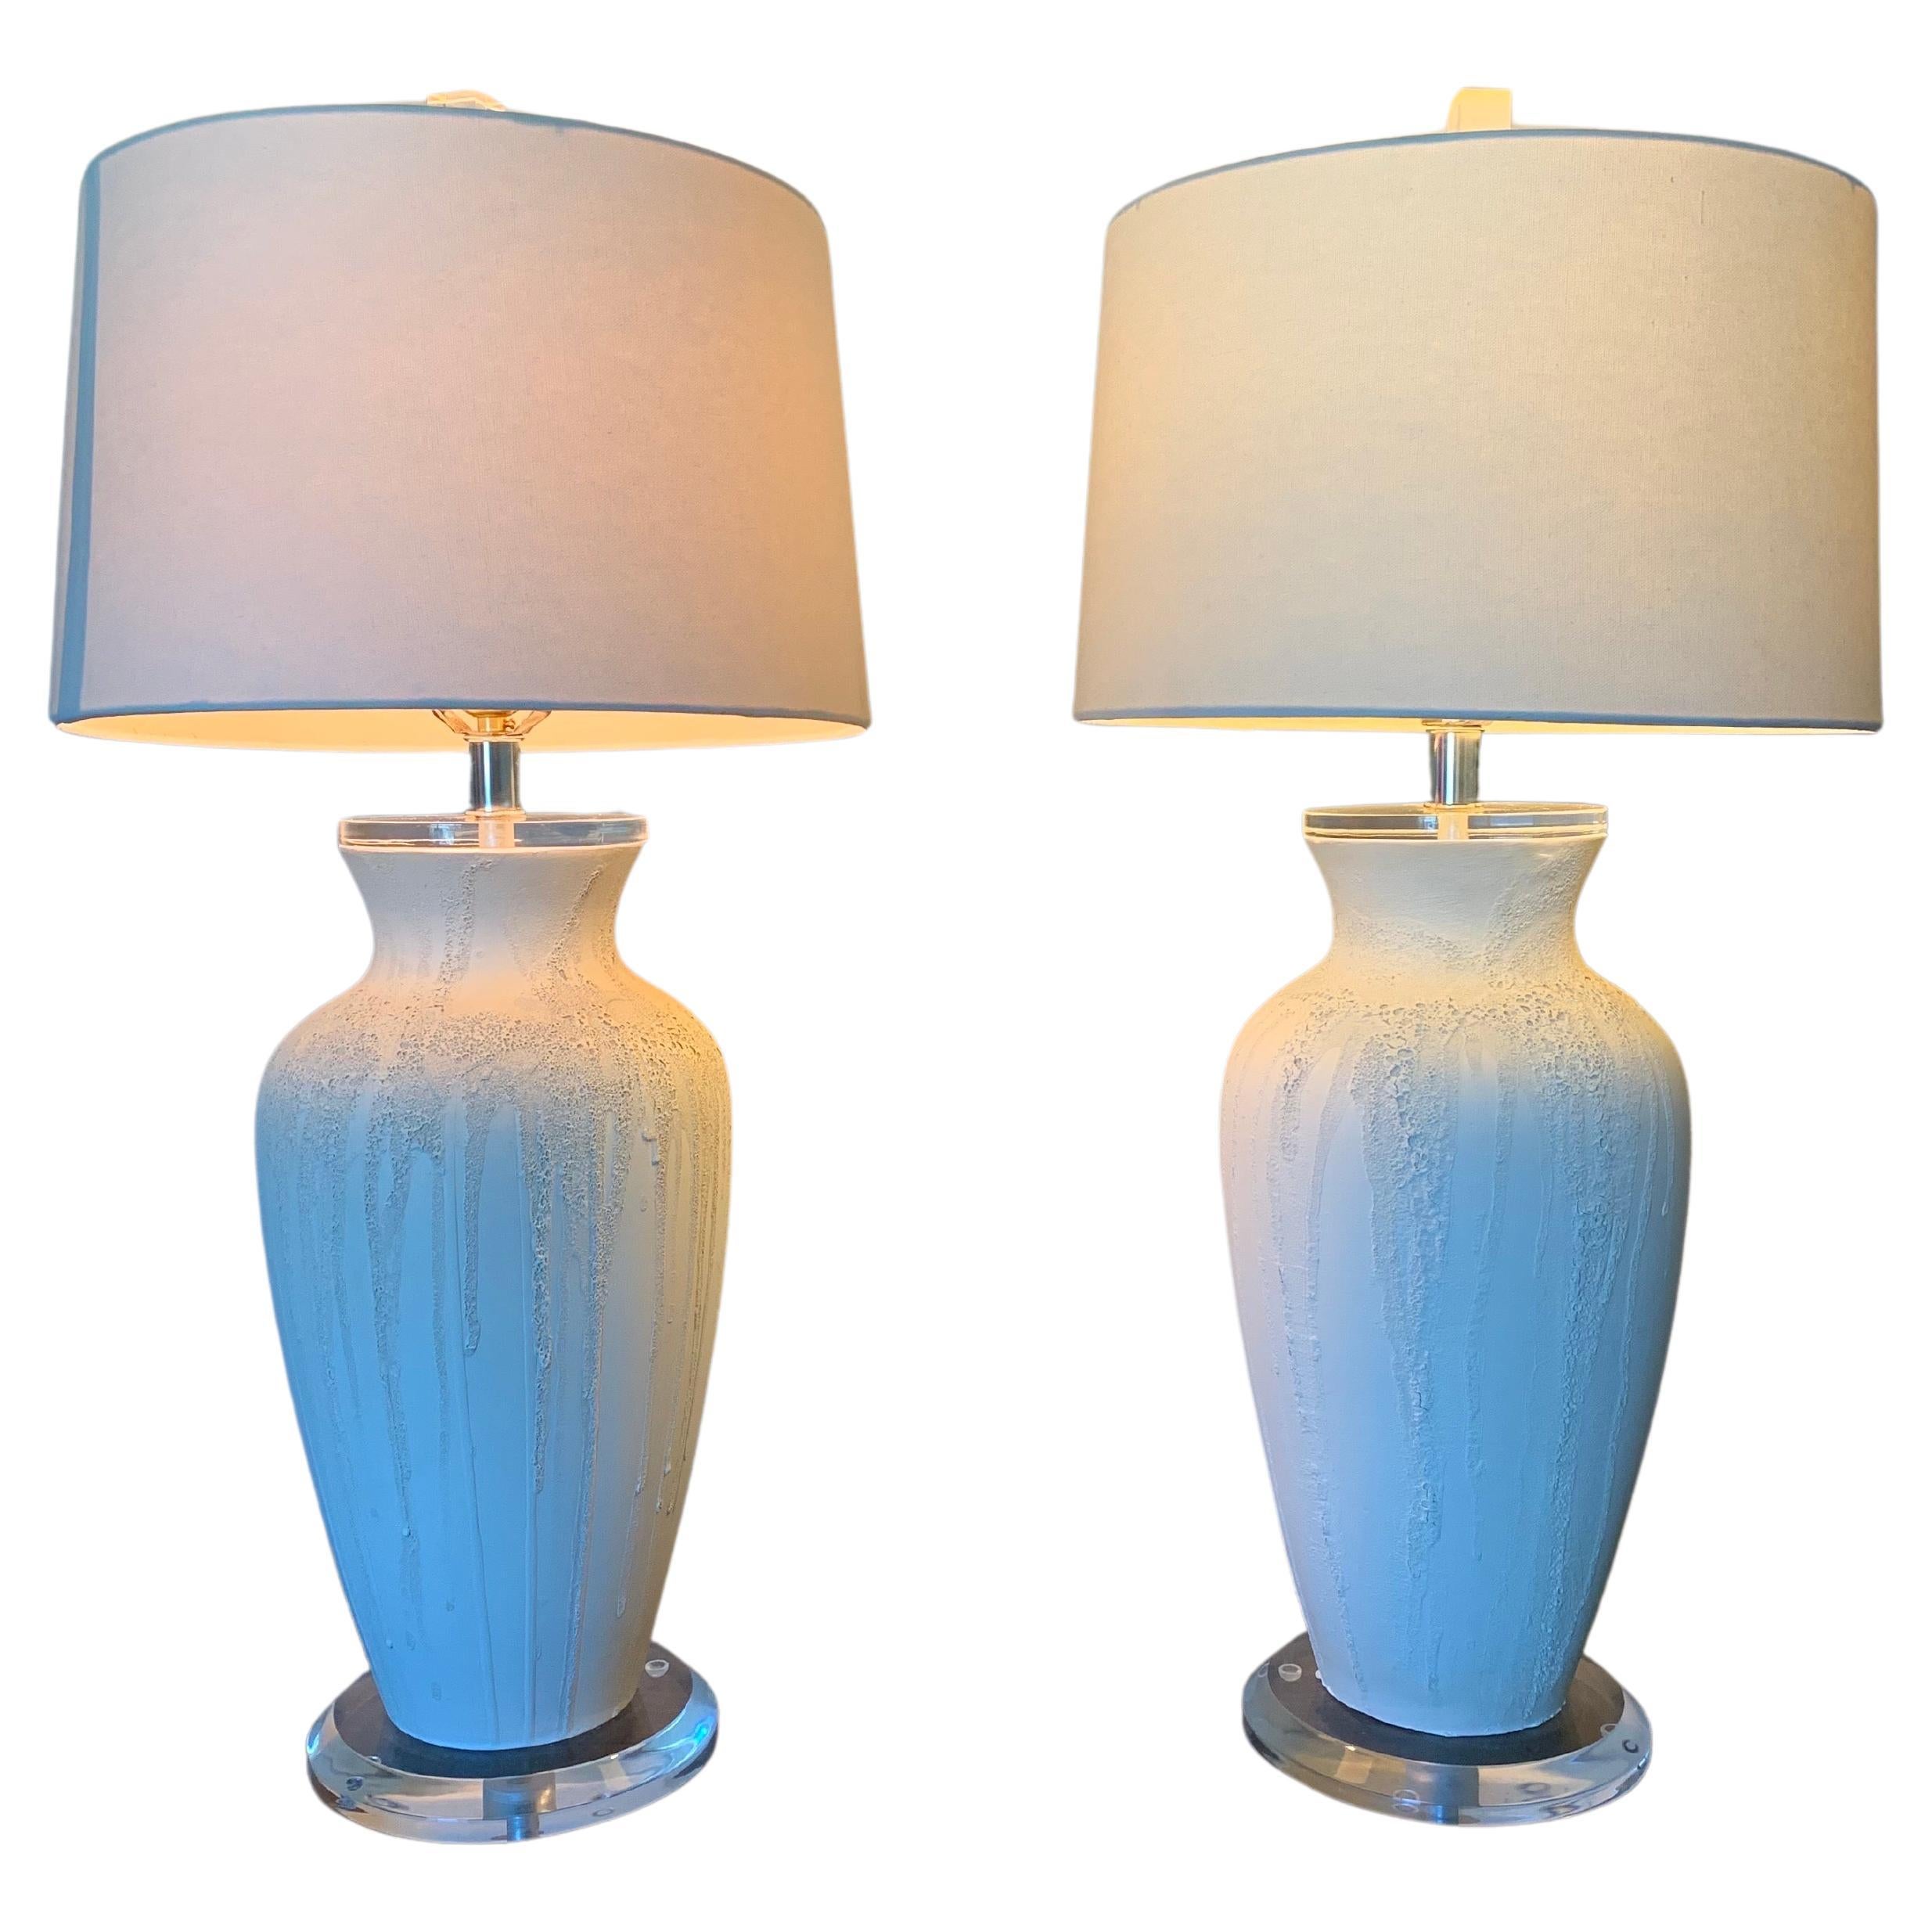 Mid century modern textured ceramic lamps in white. 